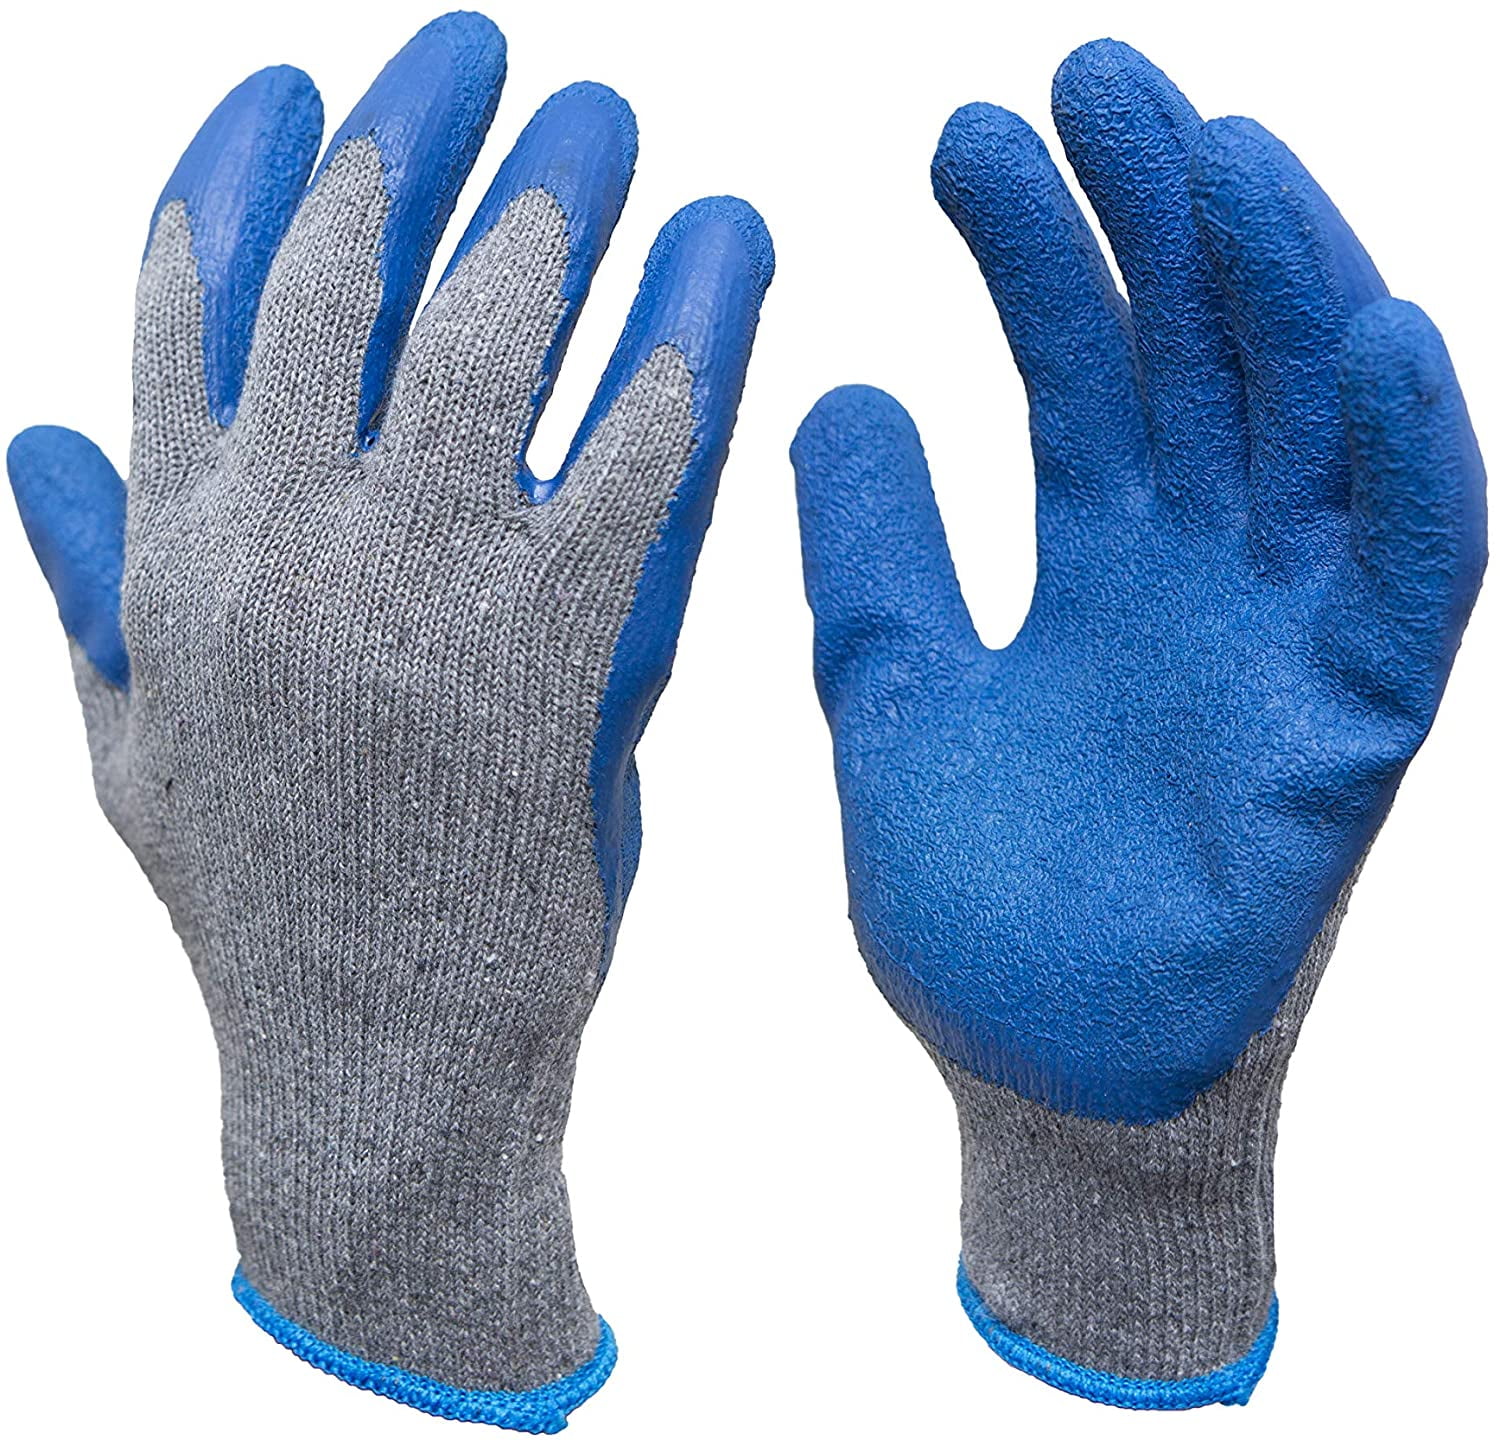 THICK SAFETY GLOVES Latex Non Slip Builder Worker Hi-Vis Thermal Strong Grip L 